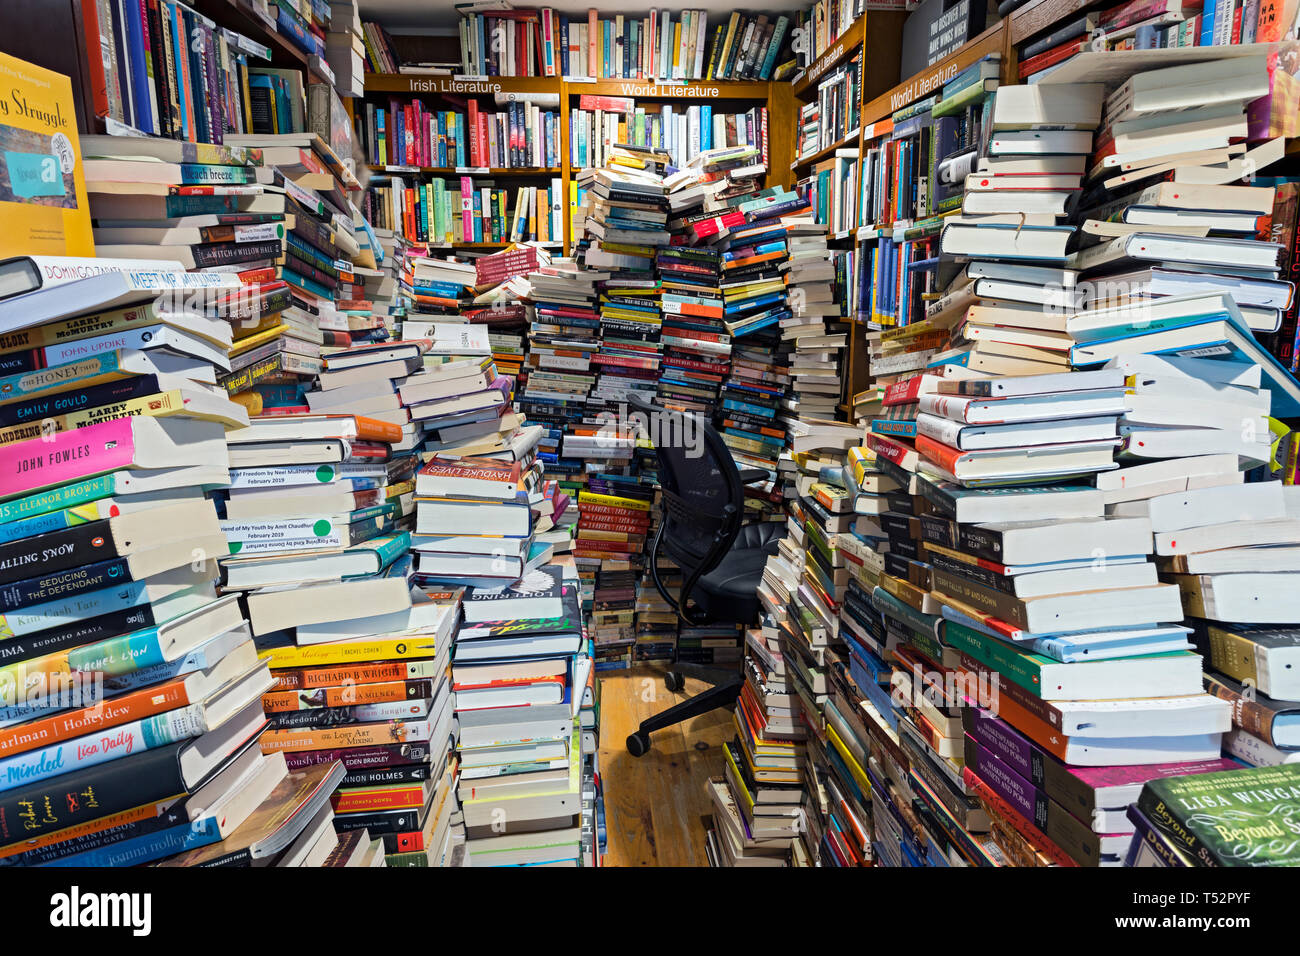 clutter and stacks of books over filling a room for space. Stock Photo